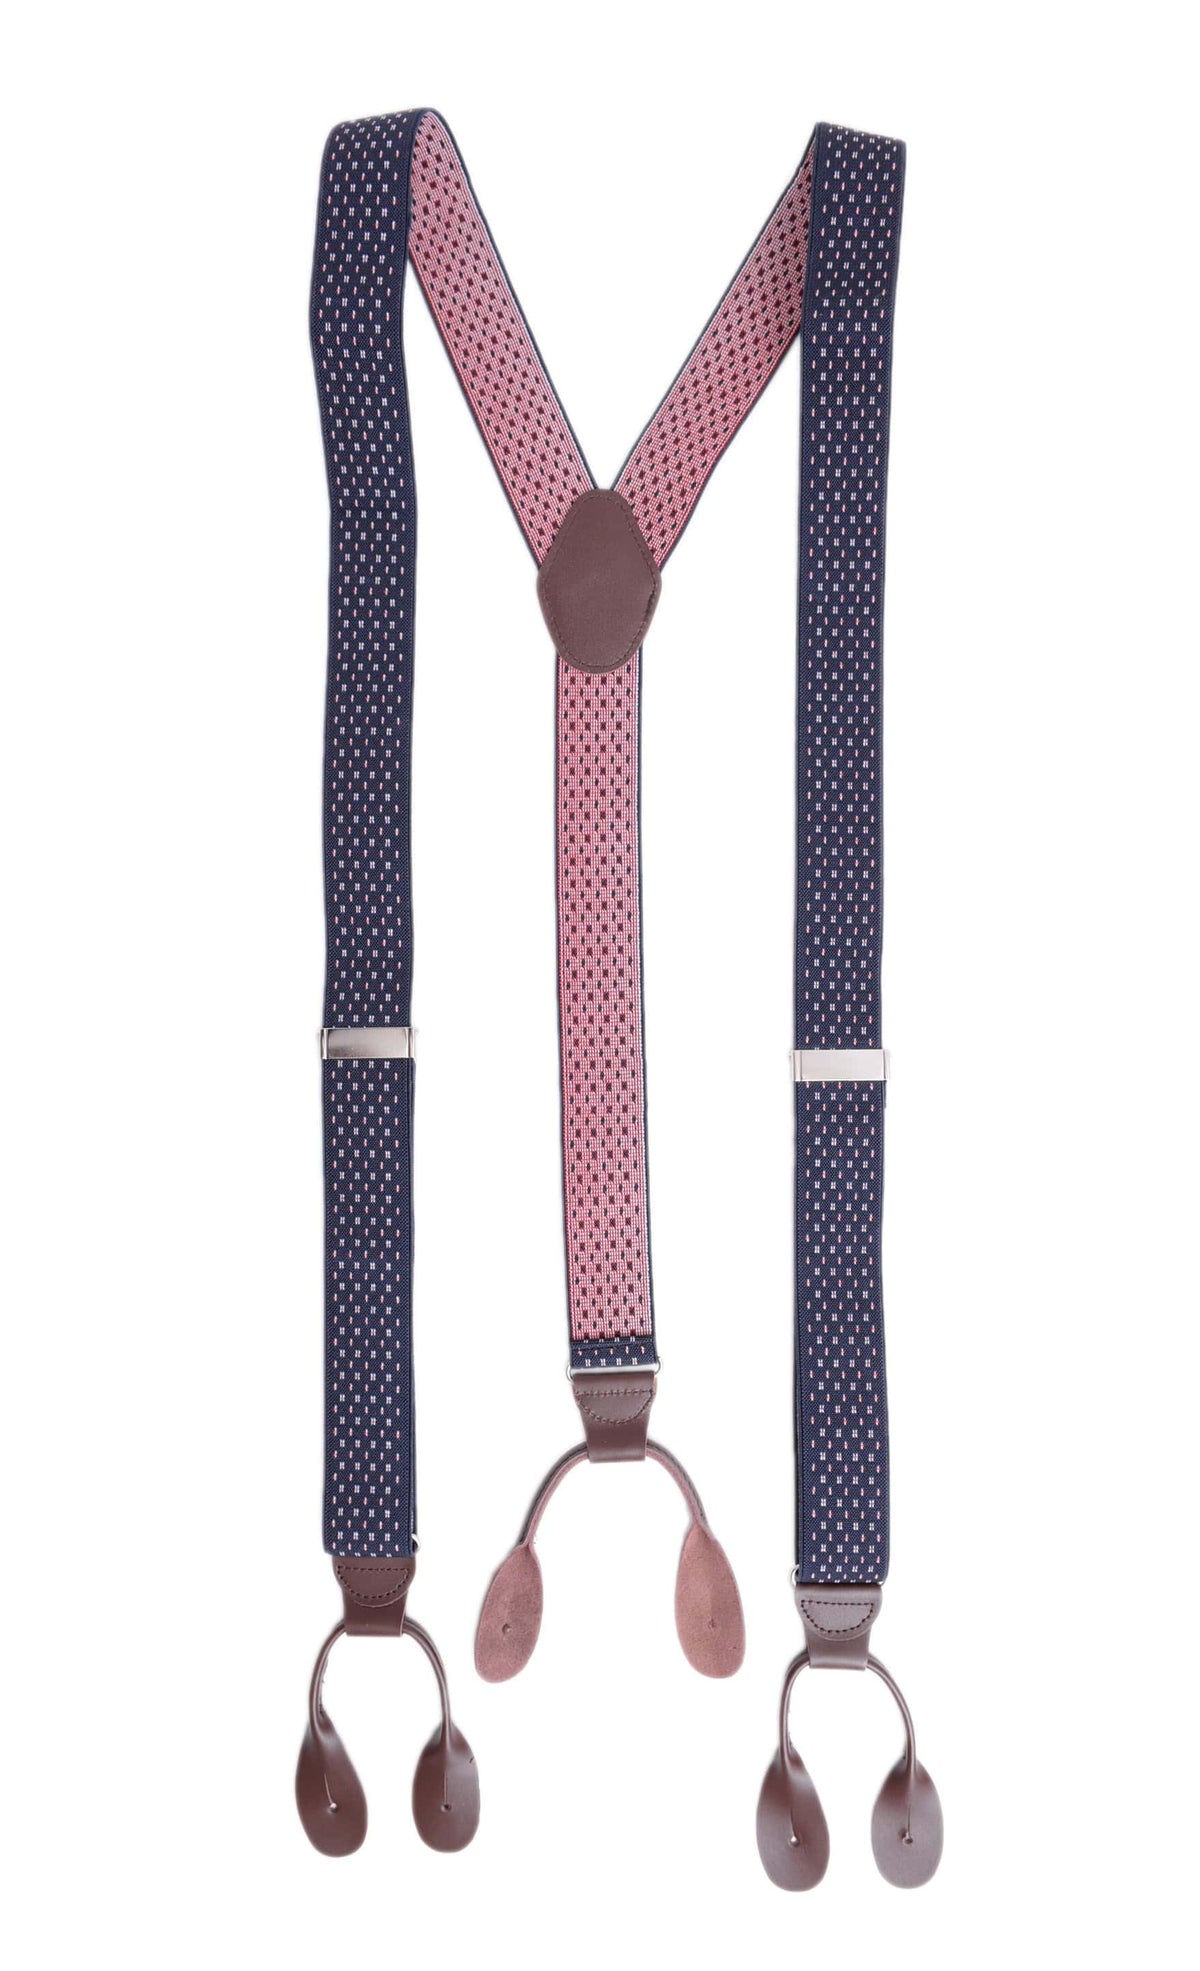 Ariston Suspenders Navy Textured / Extra Long Mens Button Brown Leather Braces Adjustable Y Back Suspenders Xlong Available